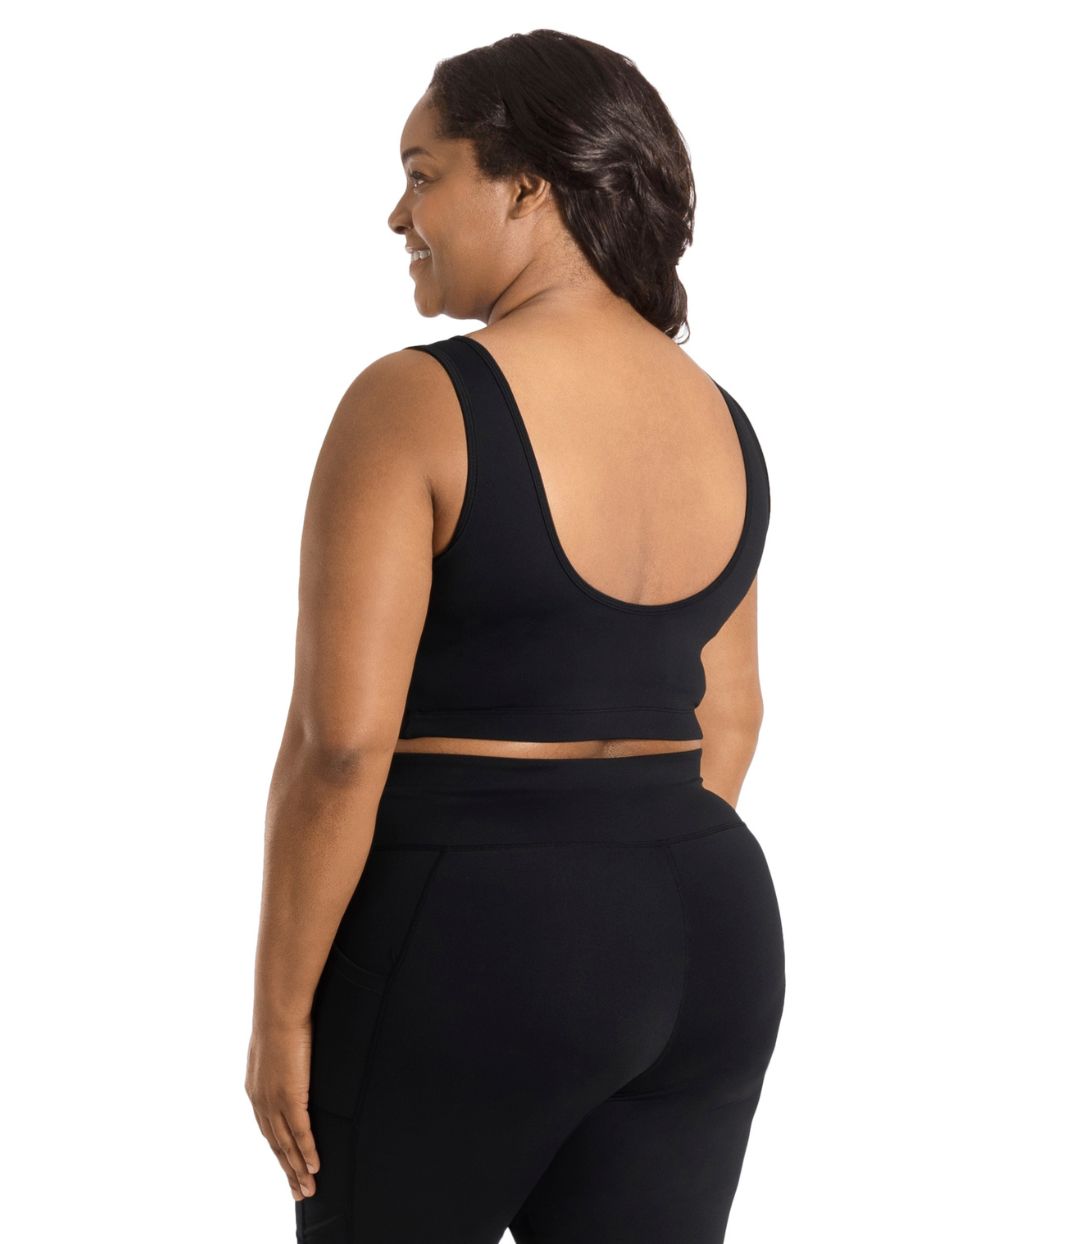 Plus size woman, facing back, wearing JunoActive plus size JunoStretch Scoop Bra in black. The woman is wearing black plus size JunoActive leggings. Her arms fall naturally to her side with her hands on her thighs.